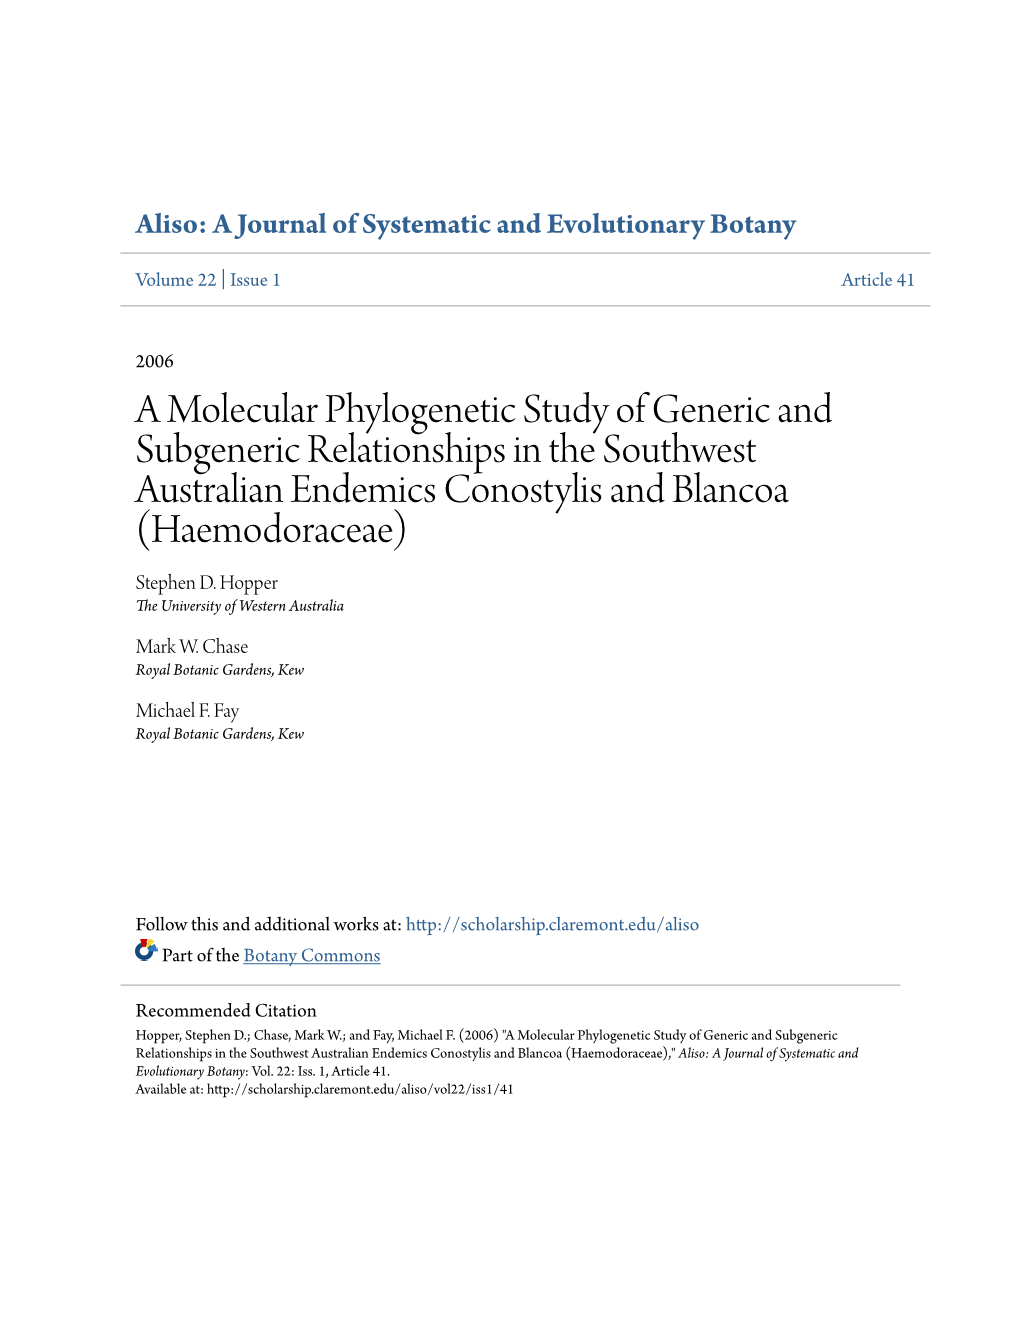 A Molecular Phylogenetic Study of Generic and Subgeneric Relationships in the Southwest Australian Endemics Conostylis and Blancoa (Haemodoraceae) Stephen D